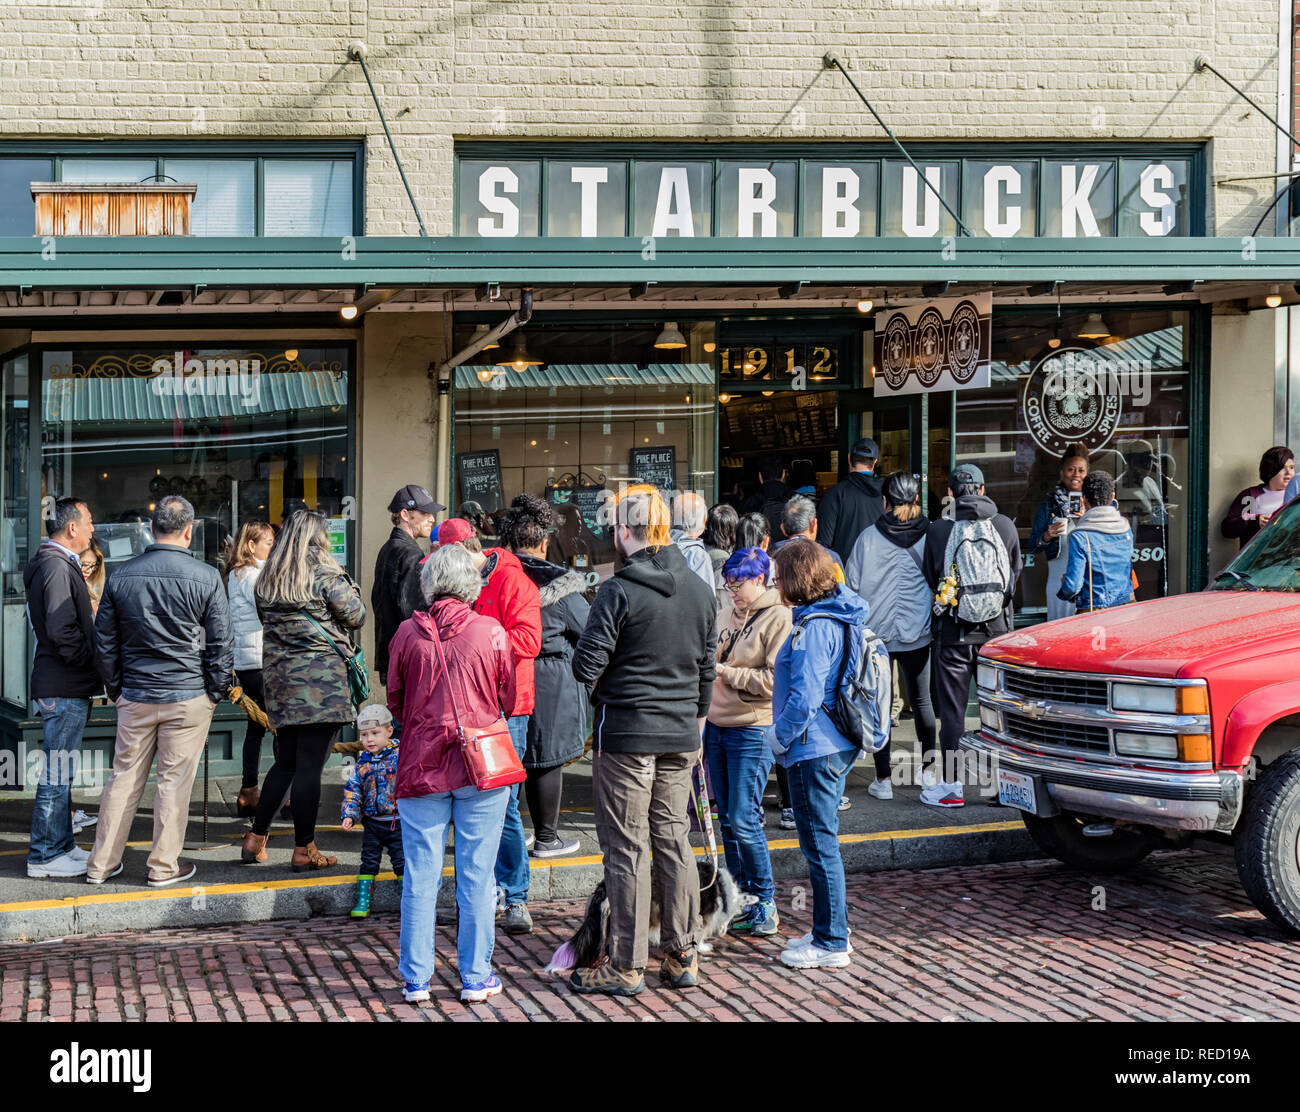 Seattle, Washington, USA - 28 October 2018. Customers queuing along the sidewalk outside the original Starbucks coffee house at 1912 Pike Place. Stock Photo